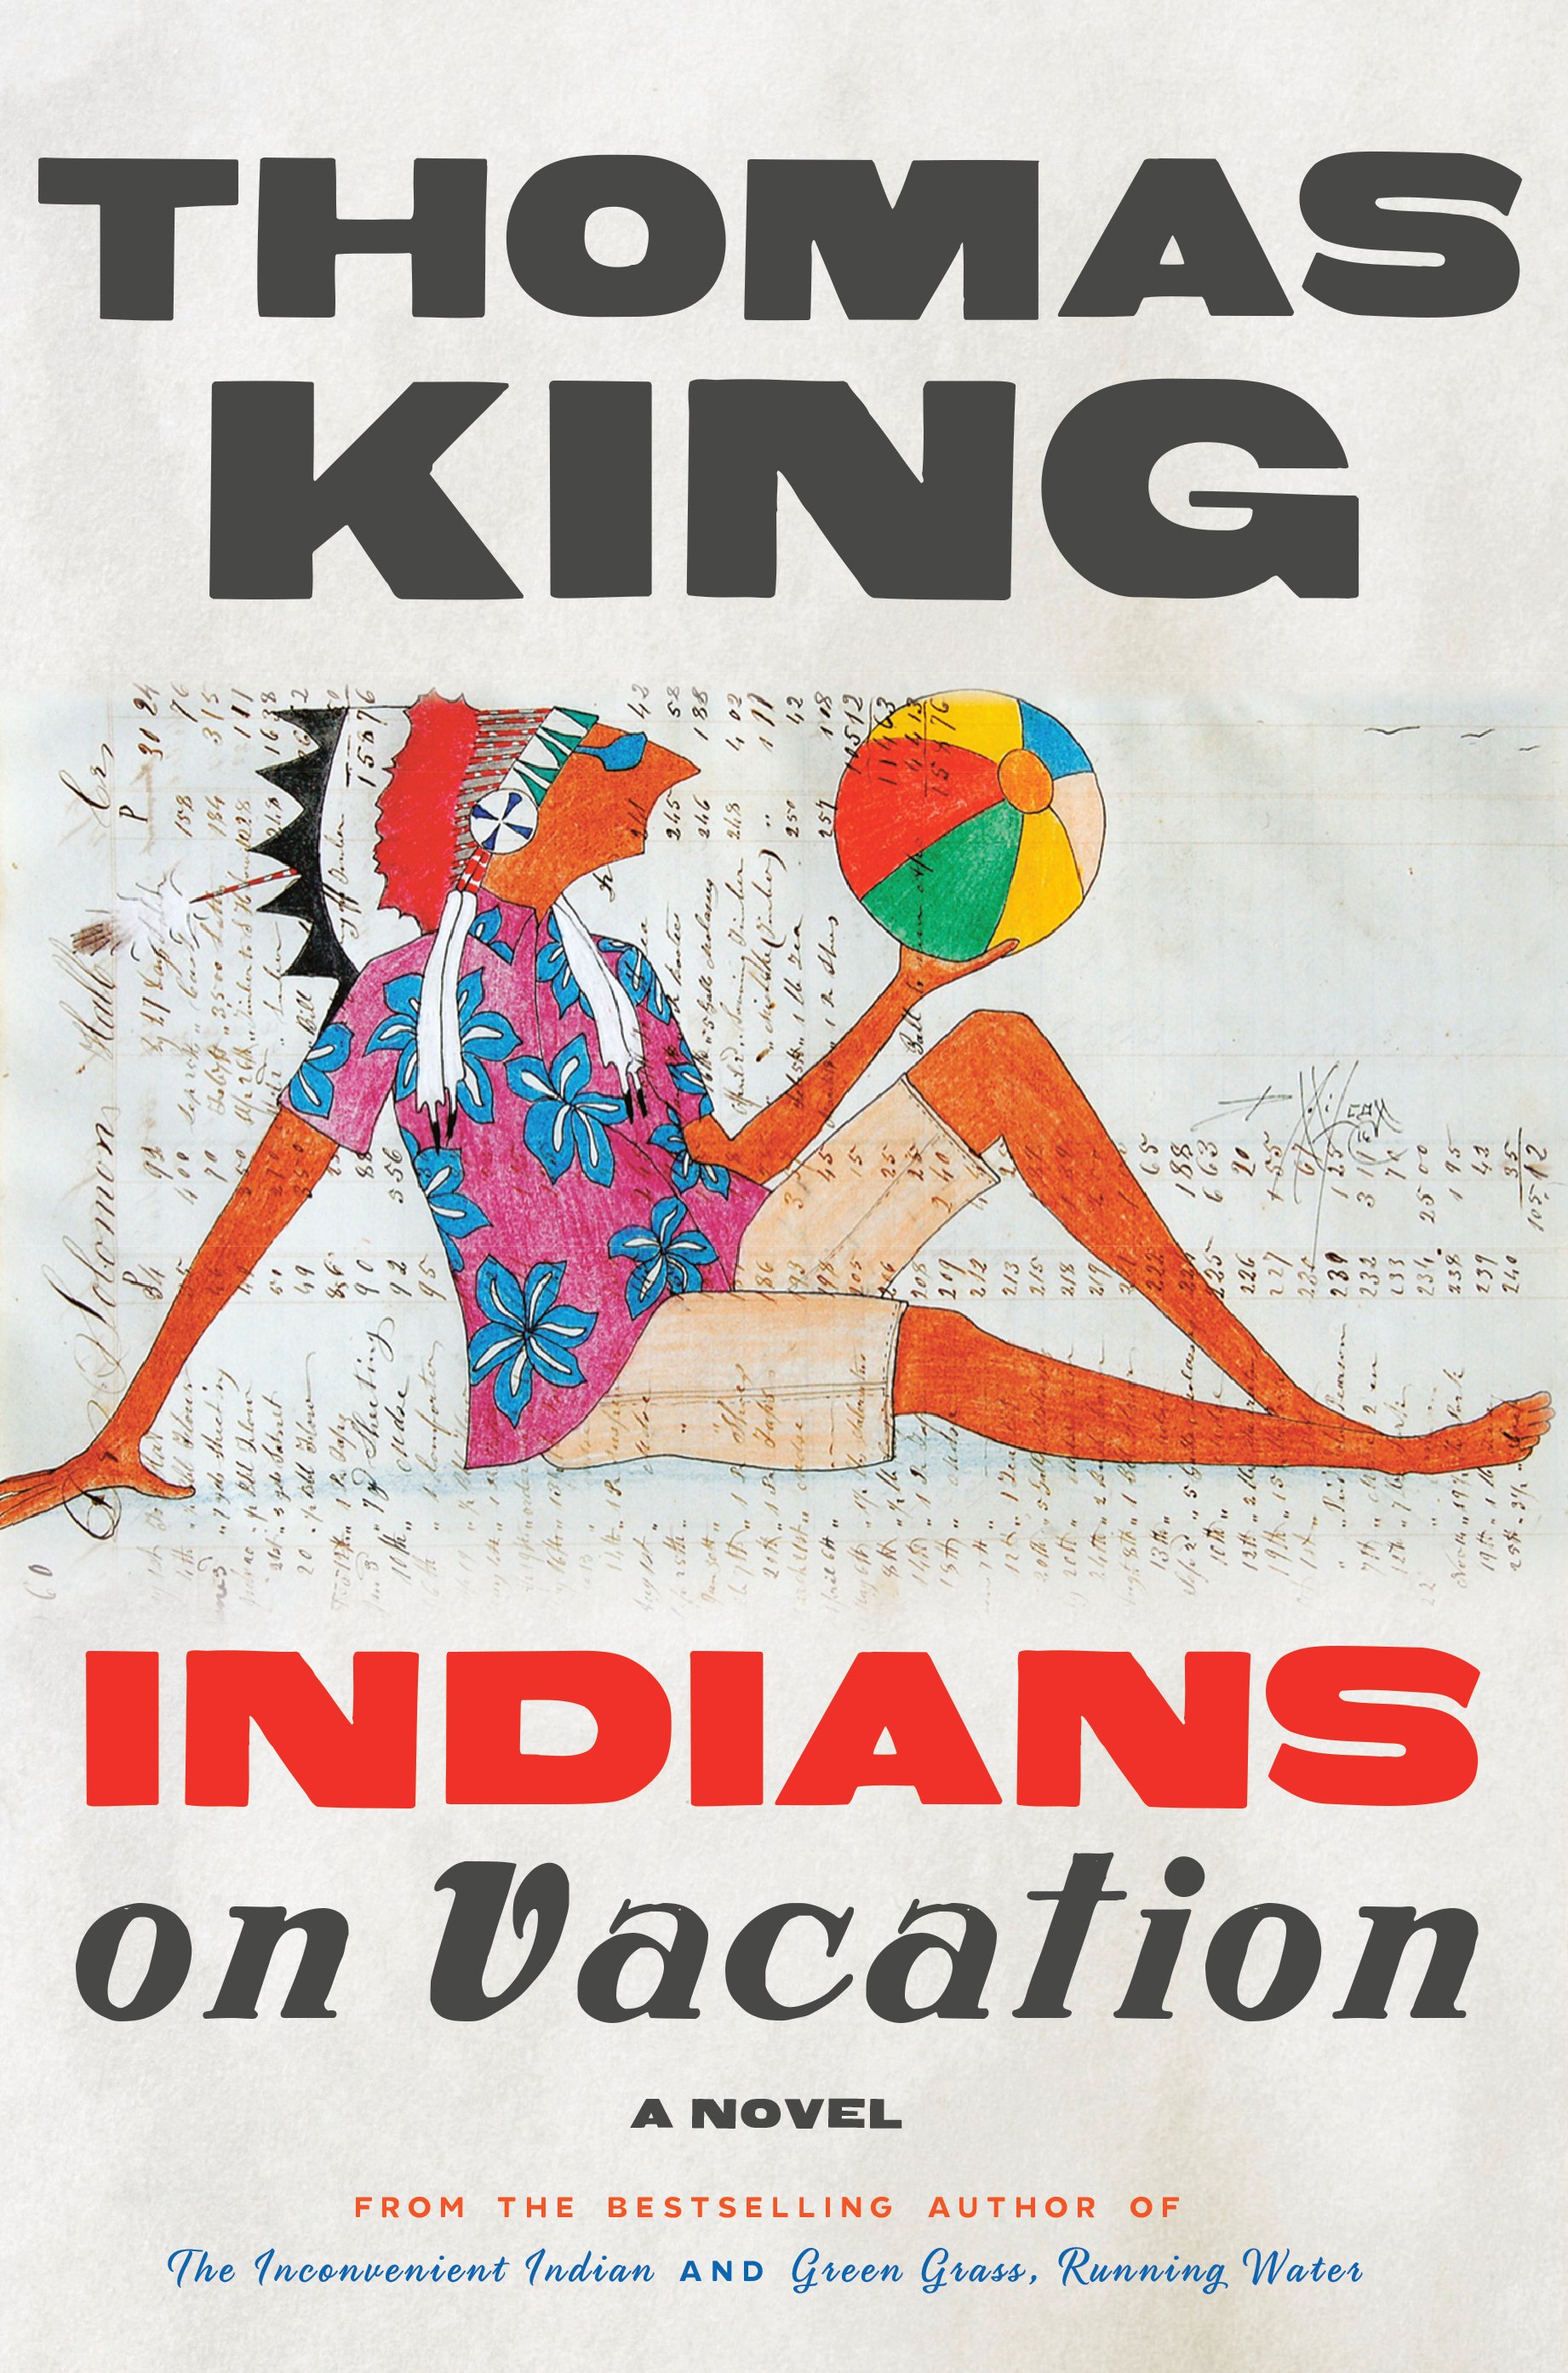 The cover of "Indians On Vacation."